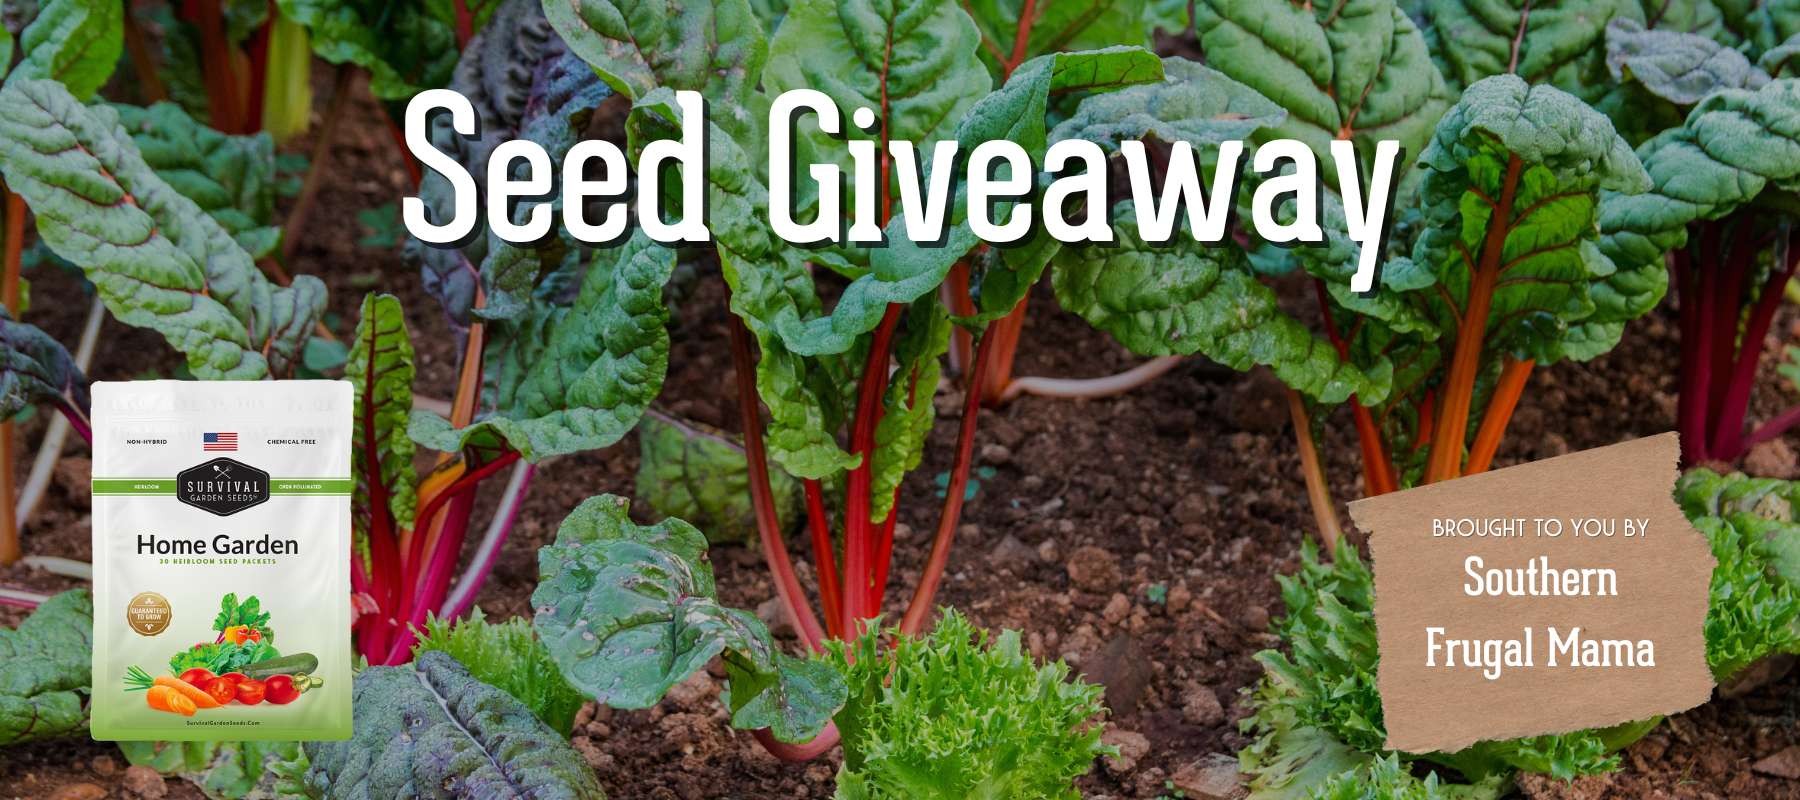 Southern Frugal Mama Seed Giveaway Contest